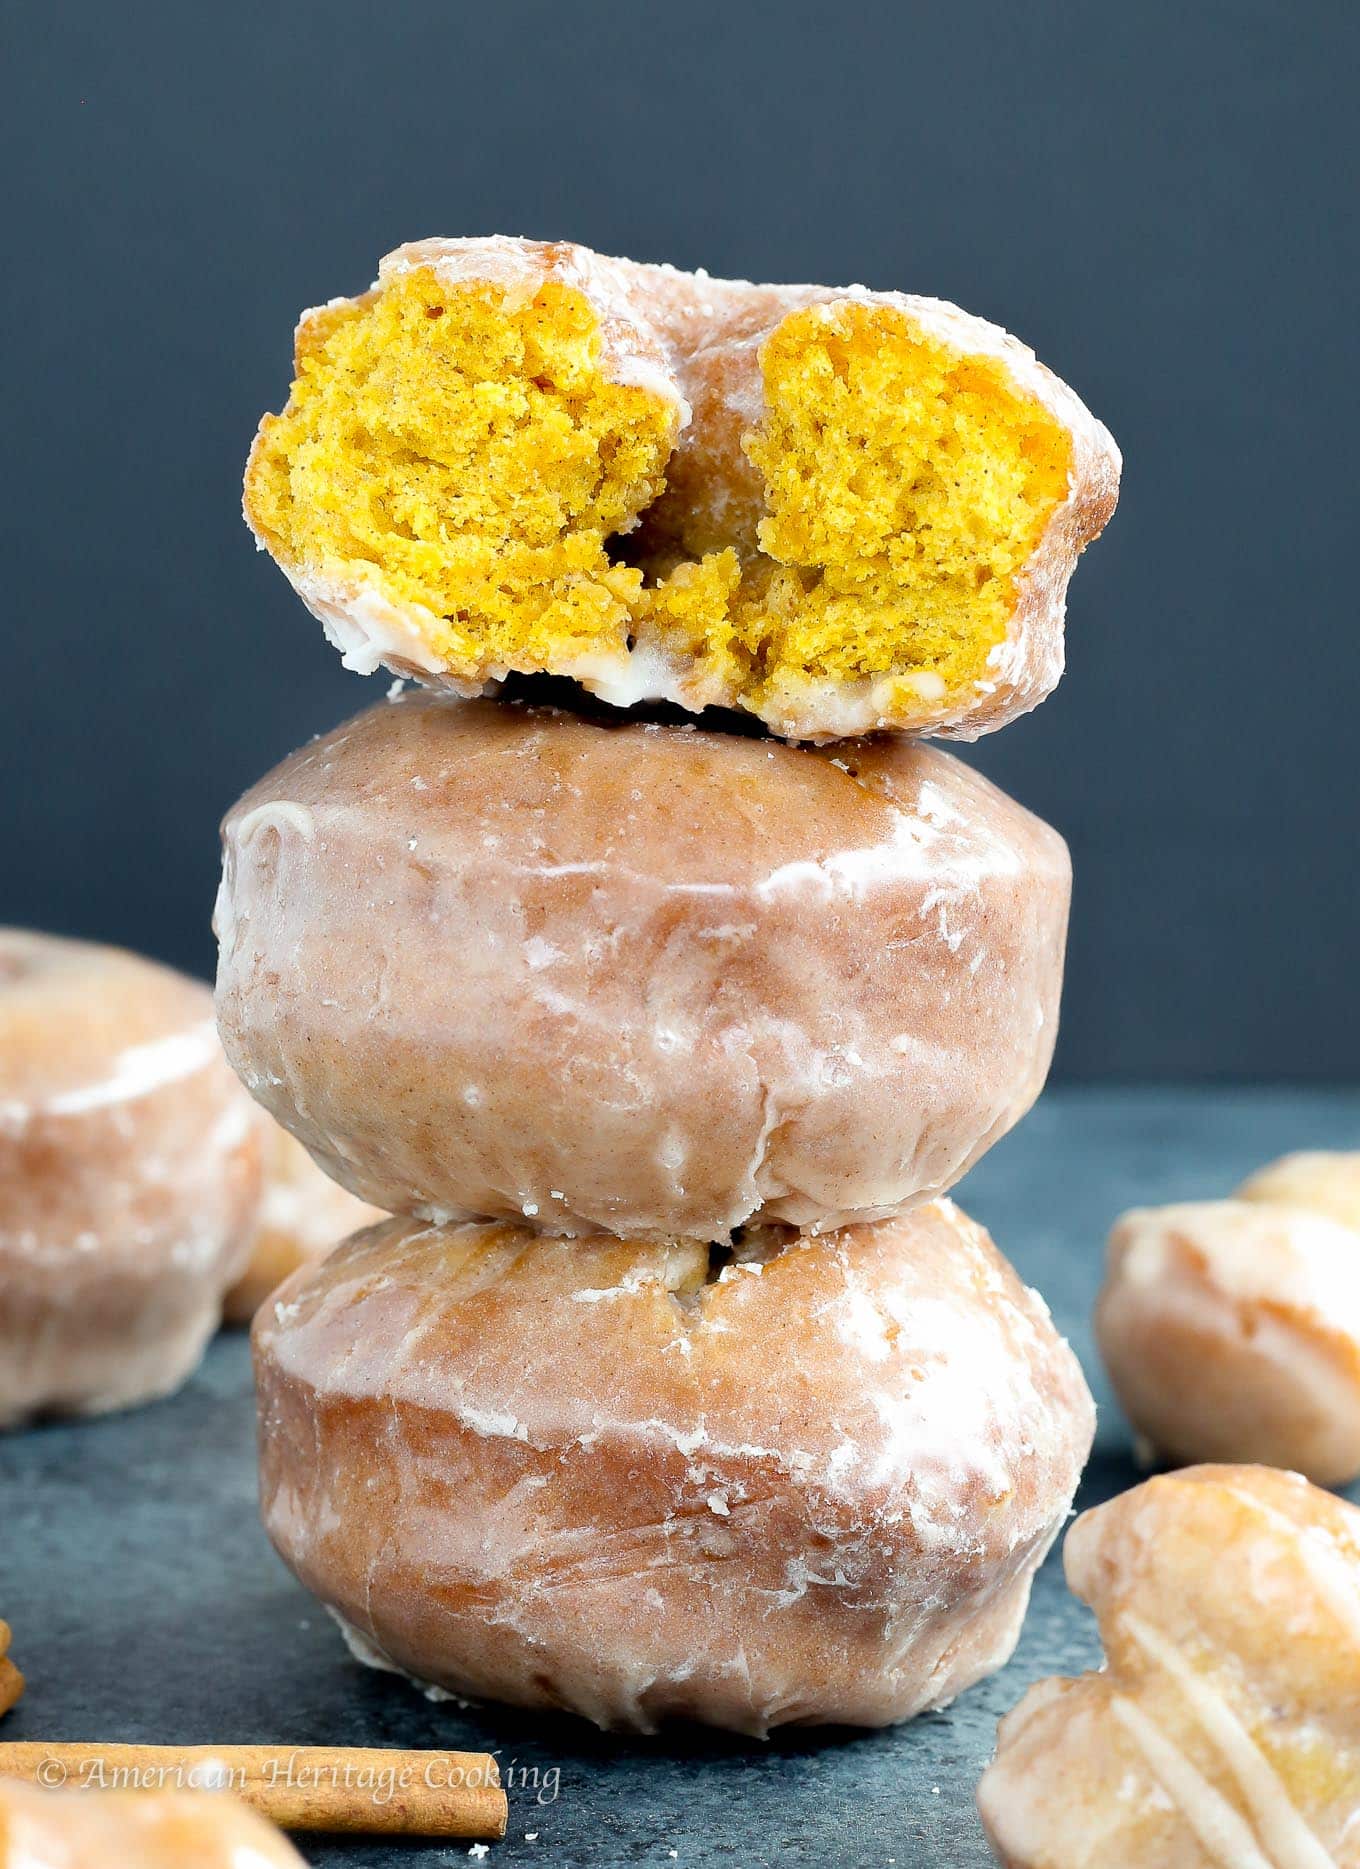 These Pumpkin Spice Cake Donuts are packed with real pumpkin and warming spices then fried to perfection and glazed with a sweet cinnamon sugar. Pretty much Pumpkin Breakfast Perfection. 